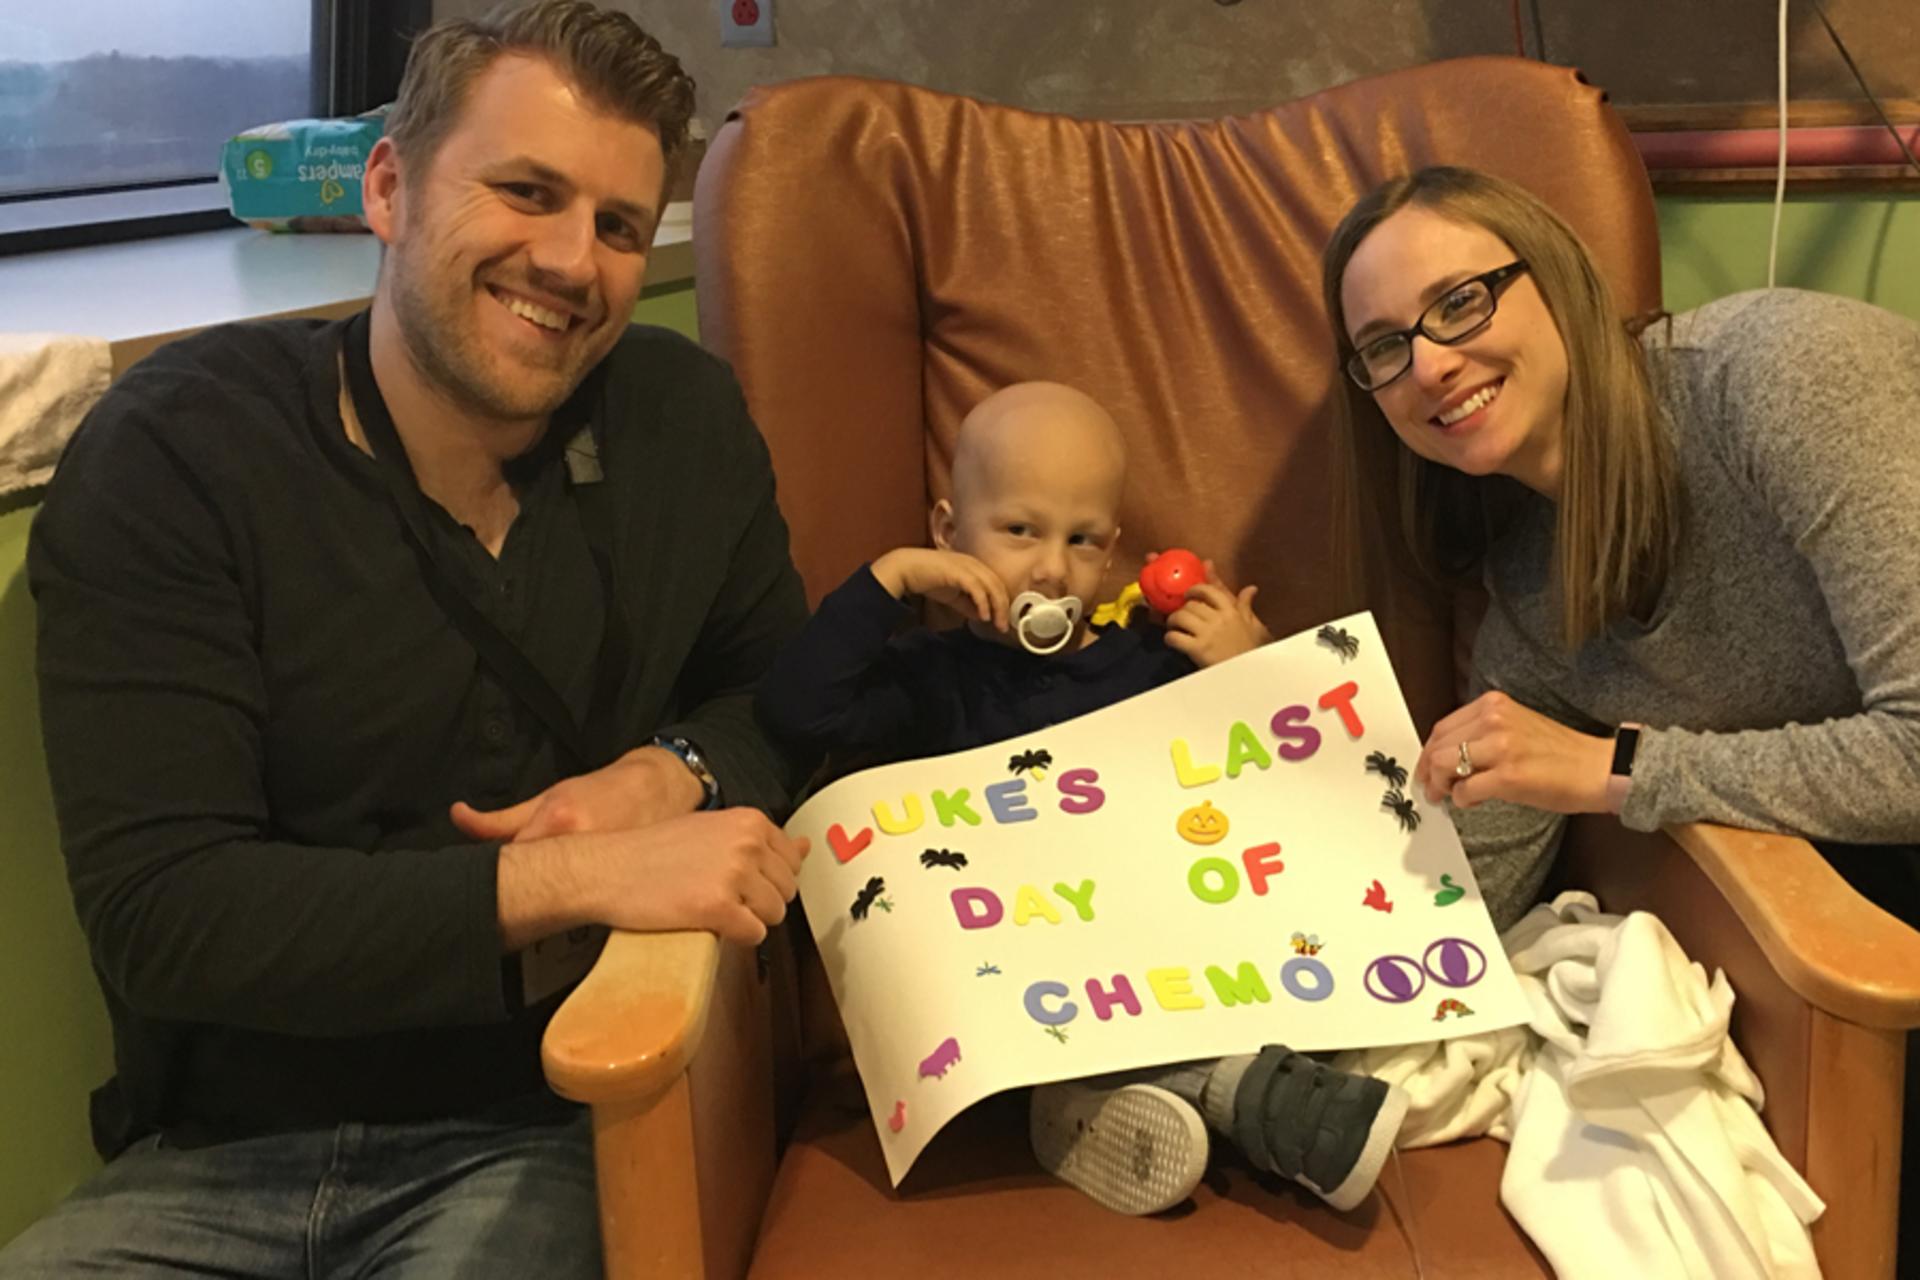 Luke in the hospital with his parents and a sign saying "Luke's last day of chemo"